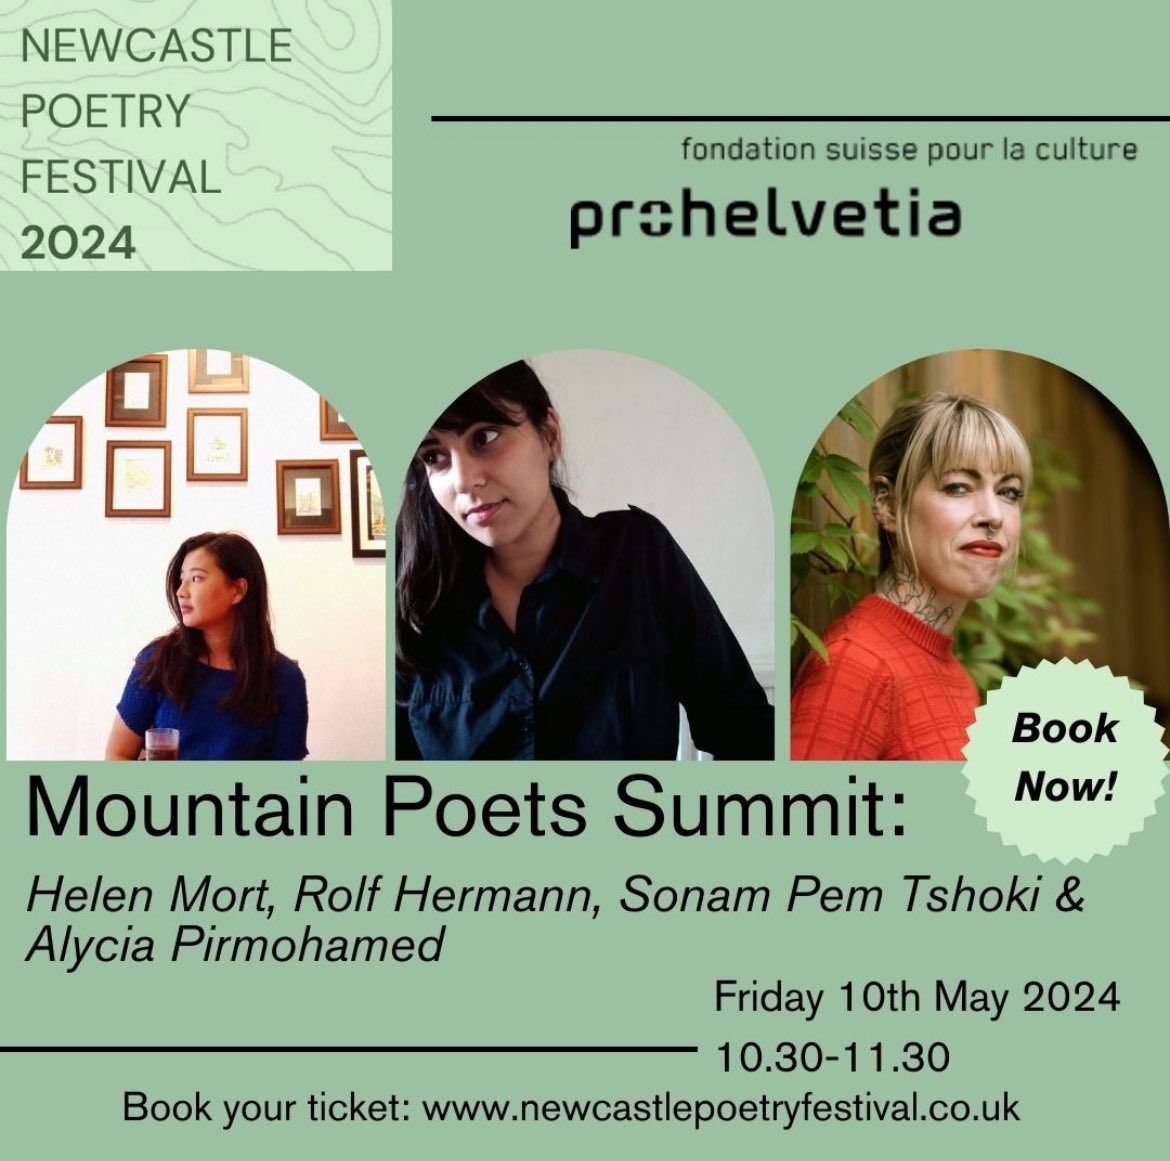 🤓This will be an exciting event for those writing about natural landscapes 🗻🌊🐟We look forward to hosting this global panel of Sonam Pem Tshoki, Alycia Pirmohamed, @HelenMort & Rolf Hermann ⛰️📚